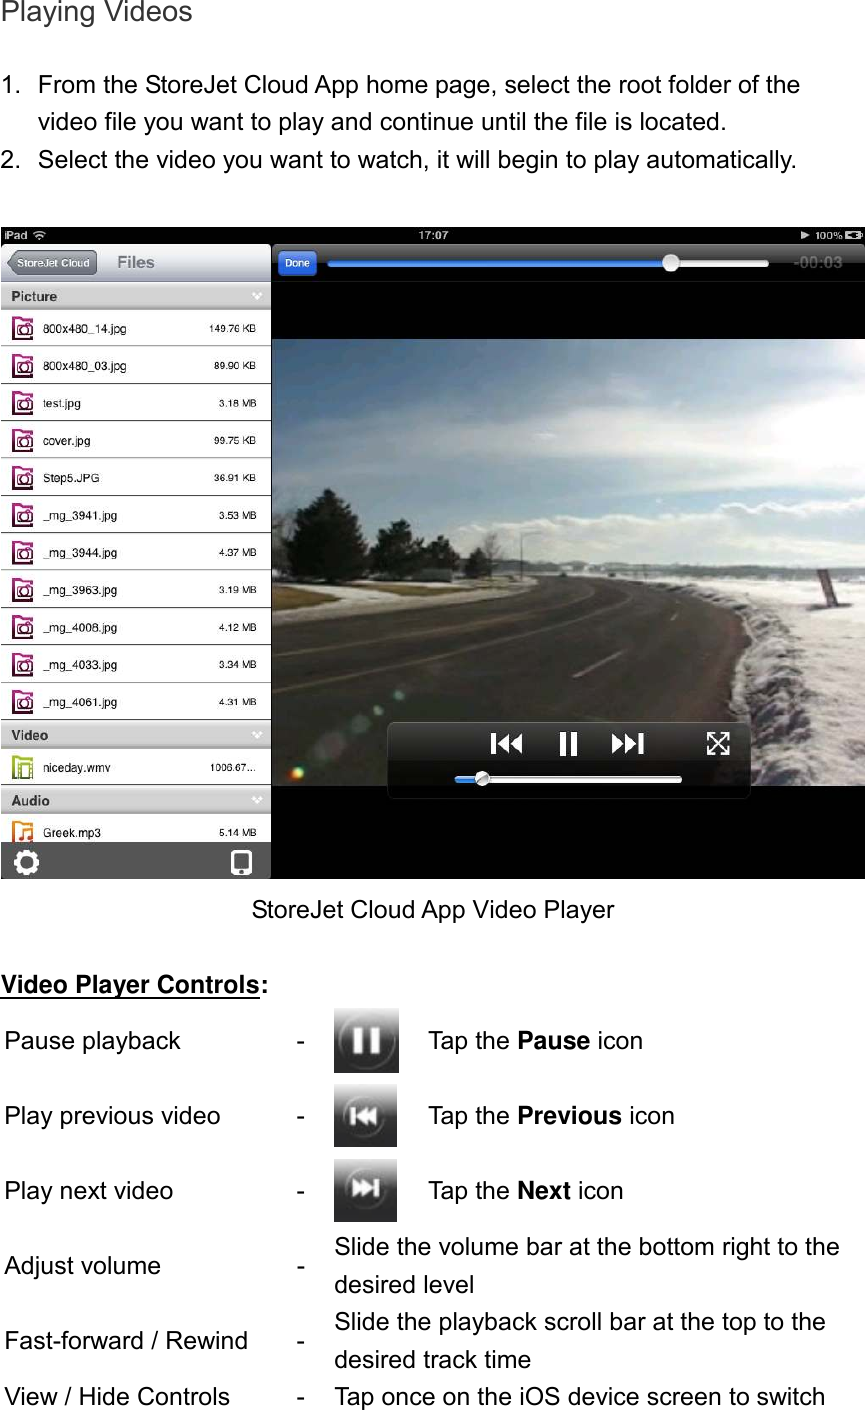 Playing Videos  1.  From the StoreJet Cloud App home page, select the root folder of the video file you want to play and continue until the file is located.   2.  Select the video you want to watch, it will begin to play automatically.   StoreJet Cloud App Video Player  Video Player Controls: Pause playback  -  Tap the Pause icon Play previous video  -  Tap the Previous icon Play next video  -  Tap the Next icon Adjust volume  - Slide the volume bar at the bottom right to the desired level Fast-forward / Rewind  - Slide the playback scroll bar at the top to the desired track time View / Hide Controls  - Tap once on the iOS device screen to switch 